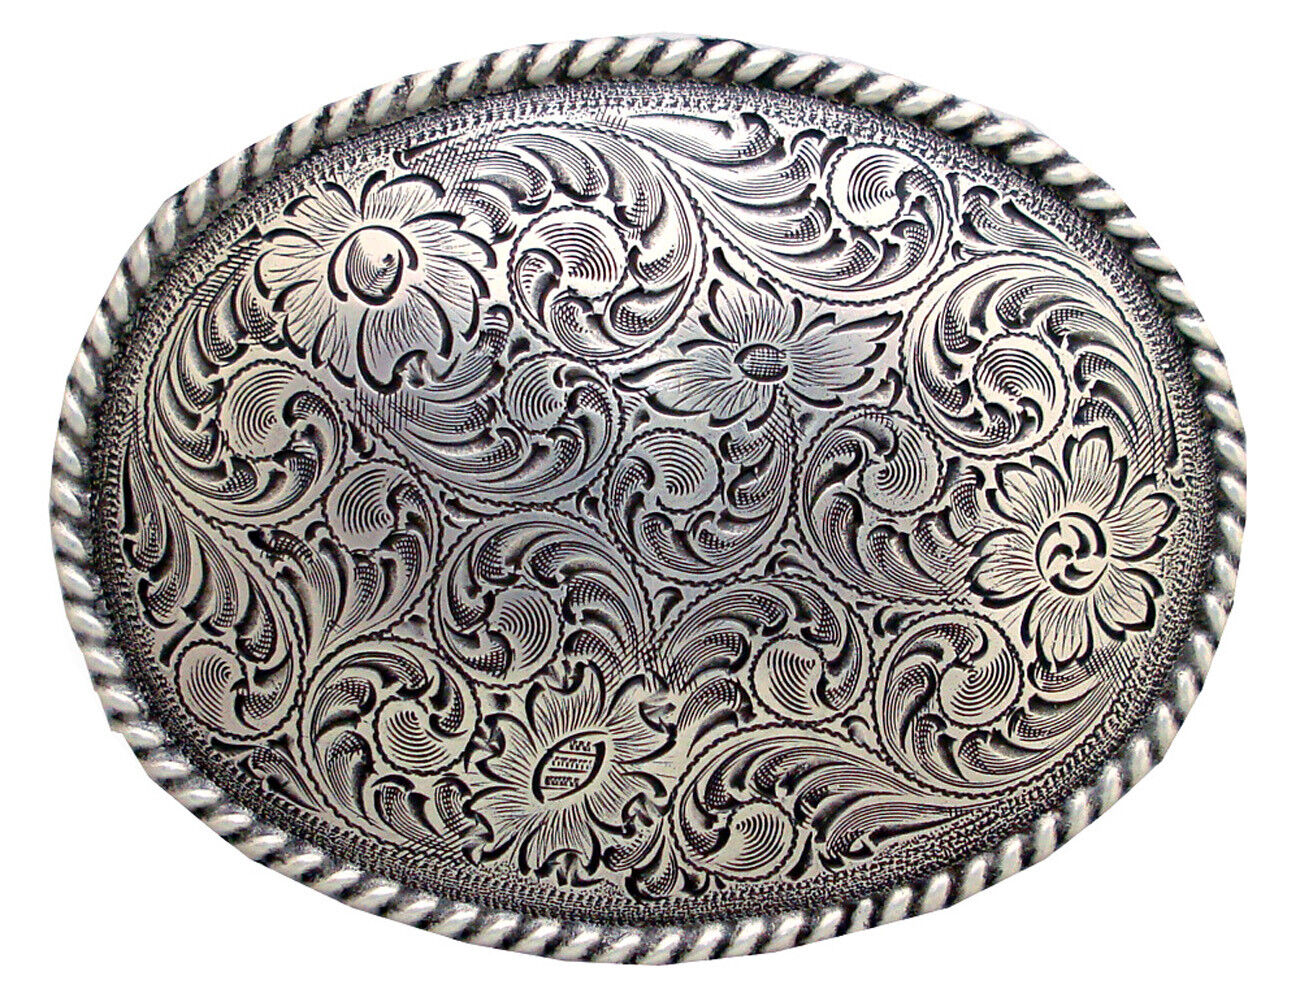 WESTERN COWBOY COWGIRL OVAL ROPE SILVER PLATED RODEO TROPHY BELT BUCKLE